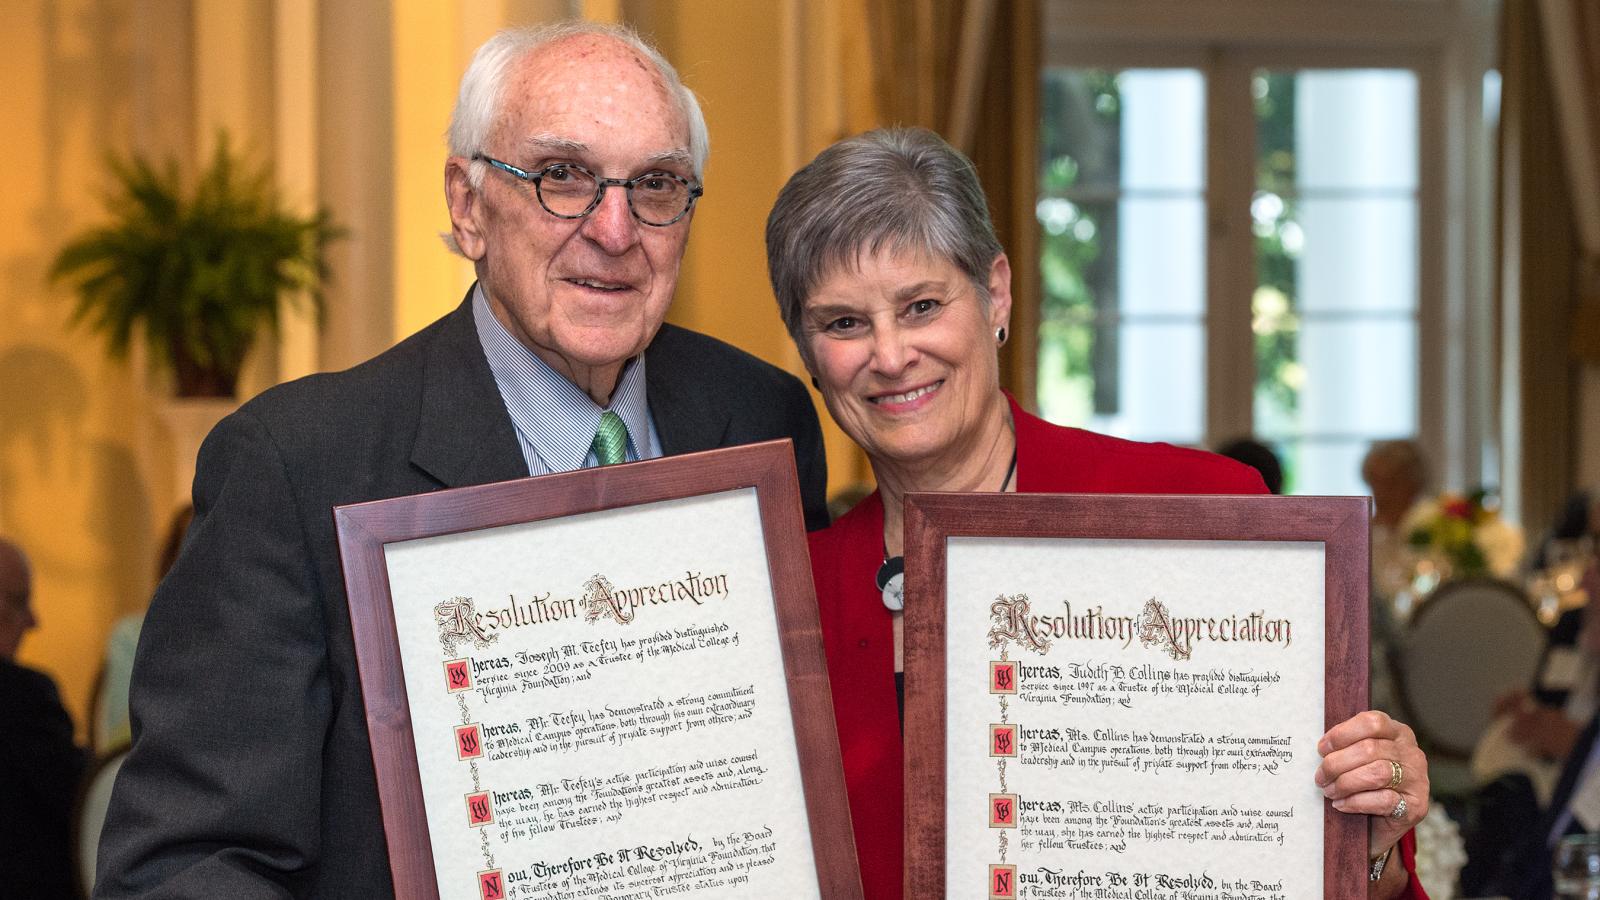 Joe Teefey, who served nine years on the MCV Foundation Board of Trustees, and Judy Collins, who served 21 years, review the resolutions welcoming them as the board’s newest Lifetime Honorary Trustees.